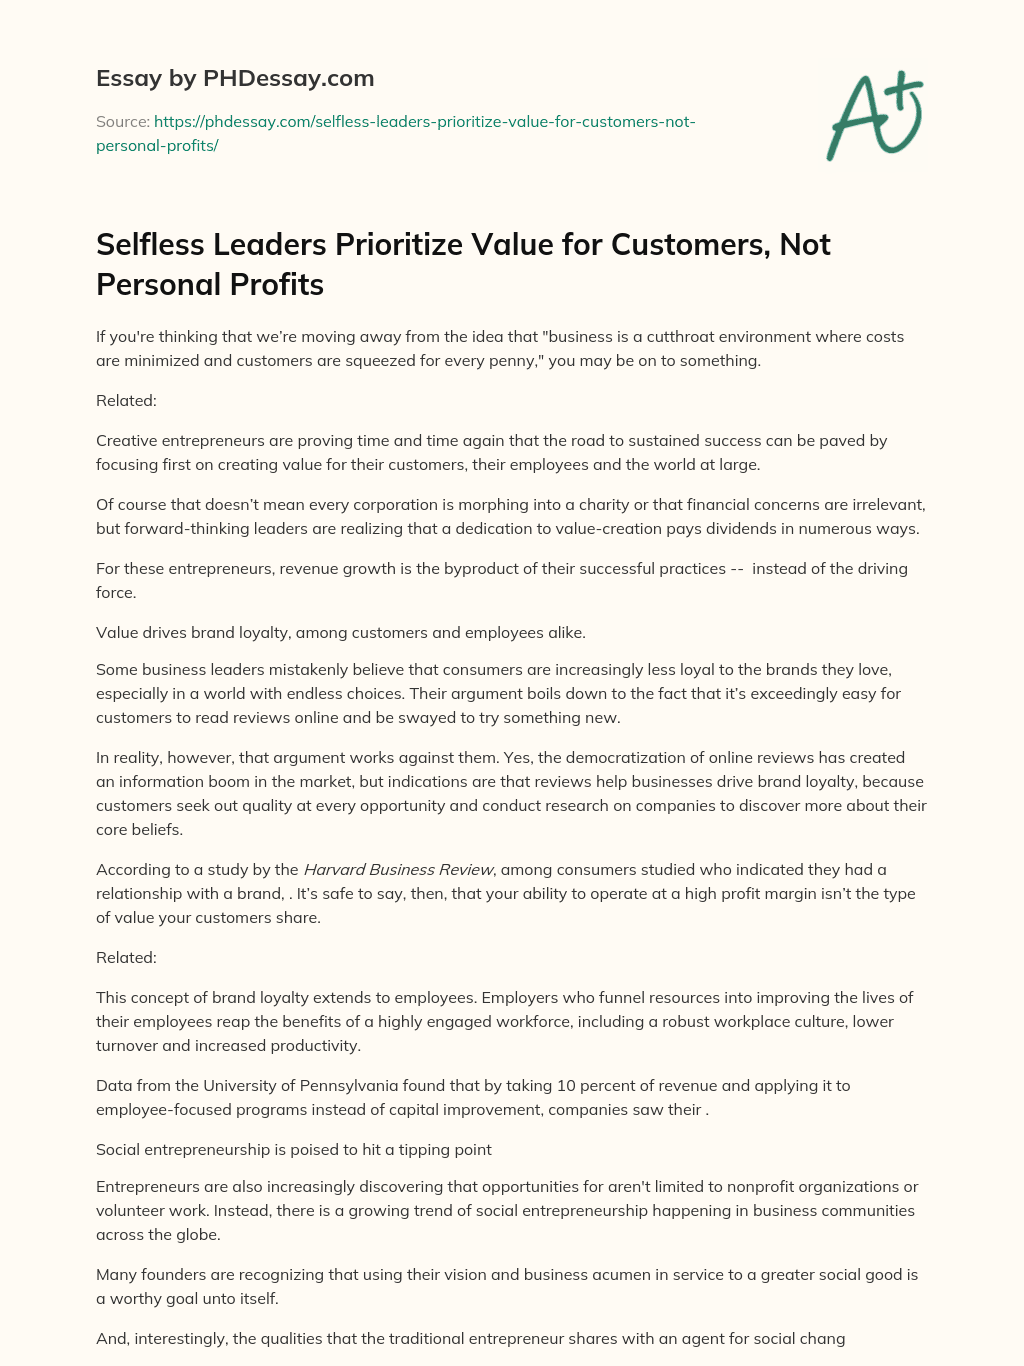 Selfless Leaders Prioritize Value for Customers, Not Personal Profits essay